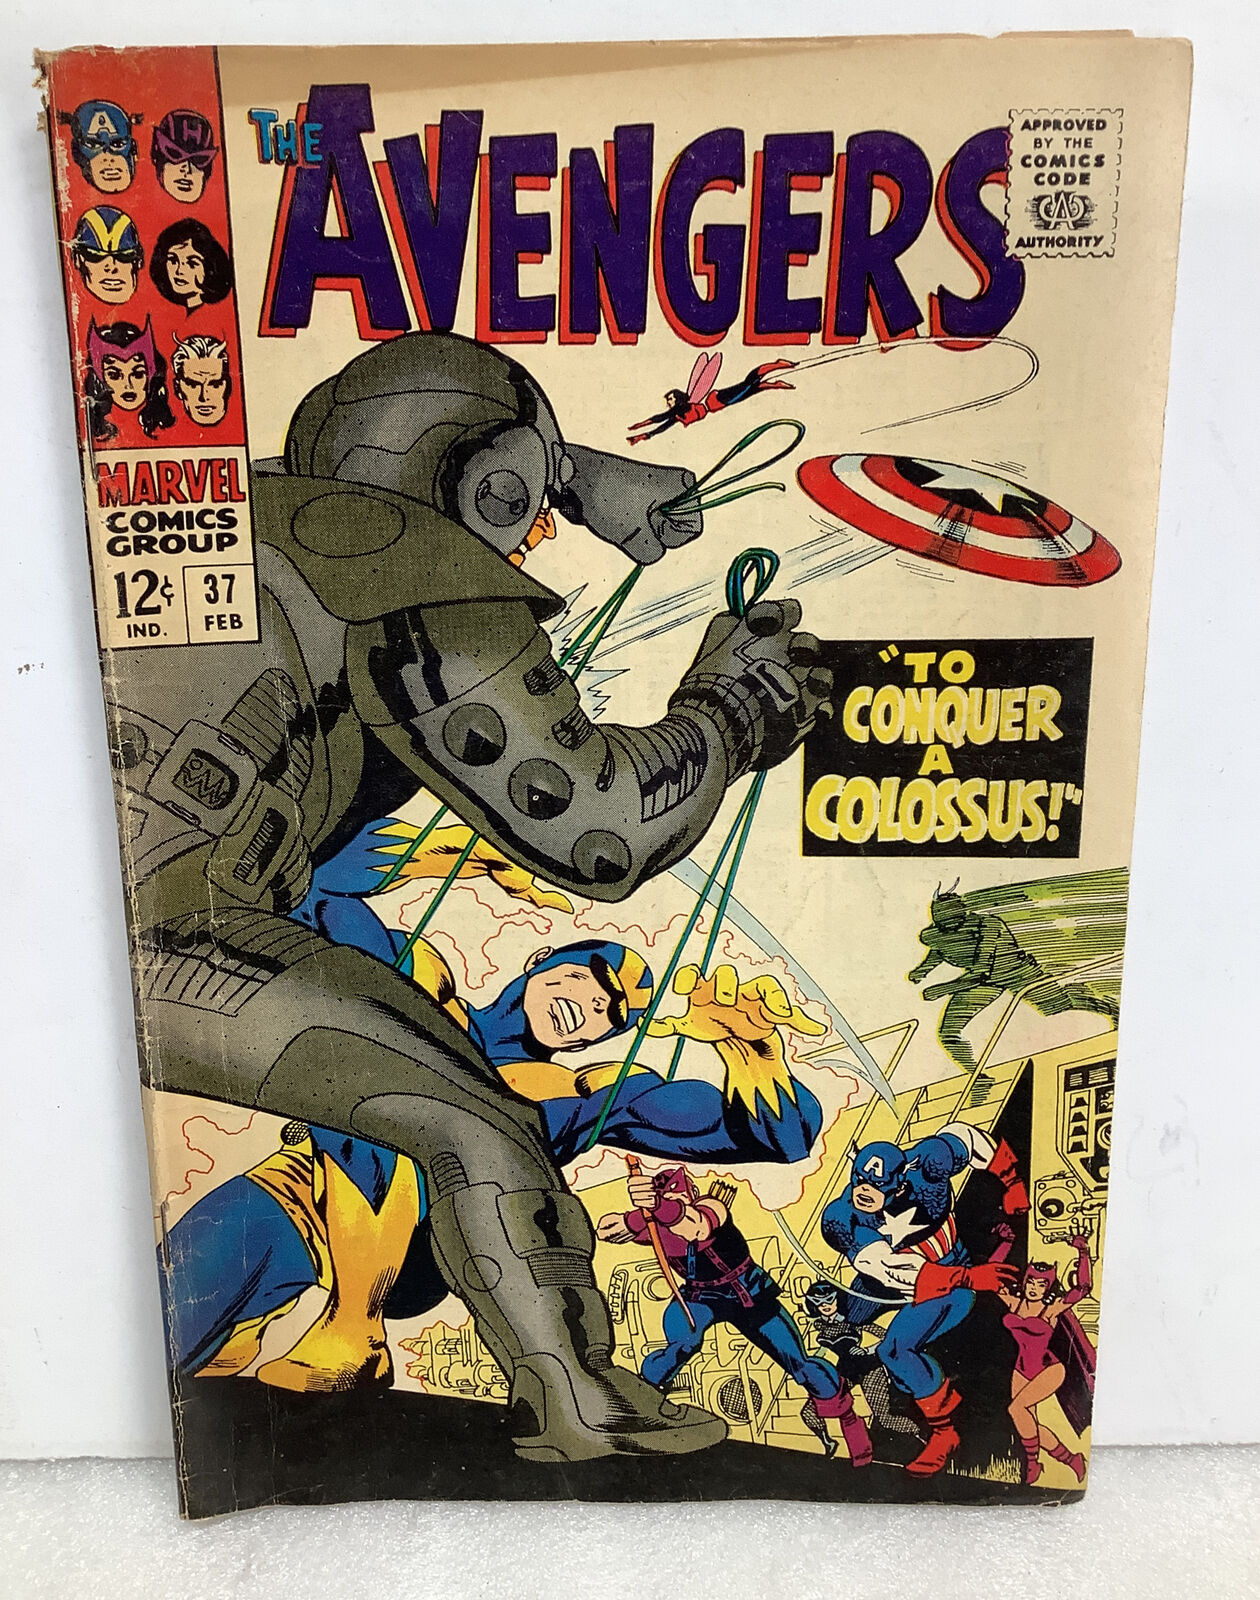 The Avengers #37 February 1967 To Conquer A Colossus. Marvel Comic Book 12Cent